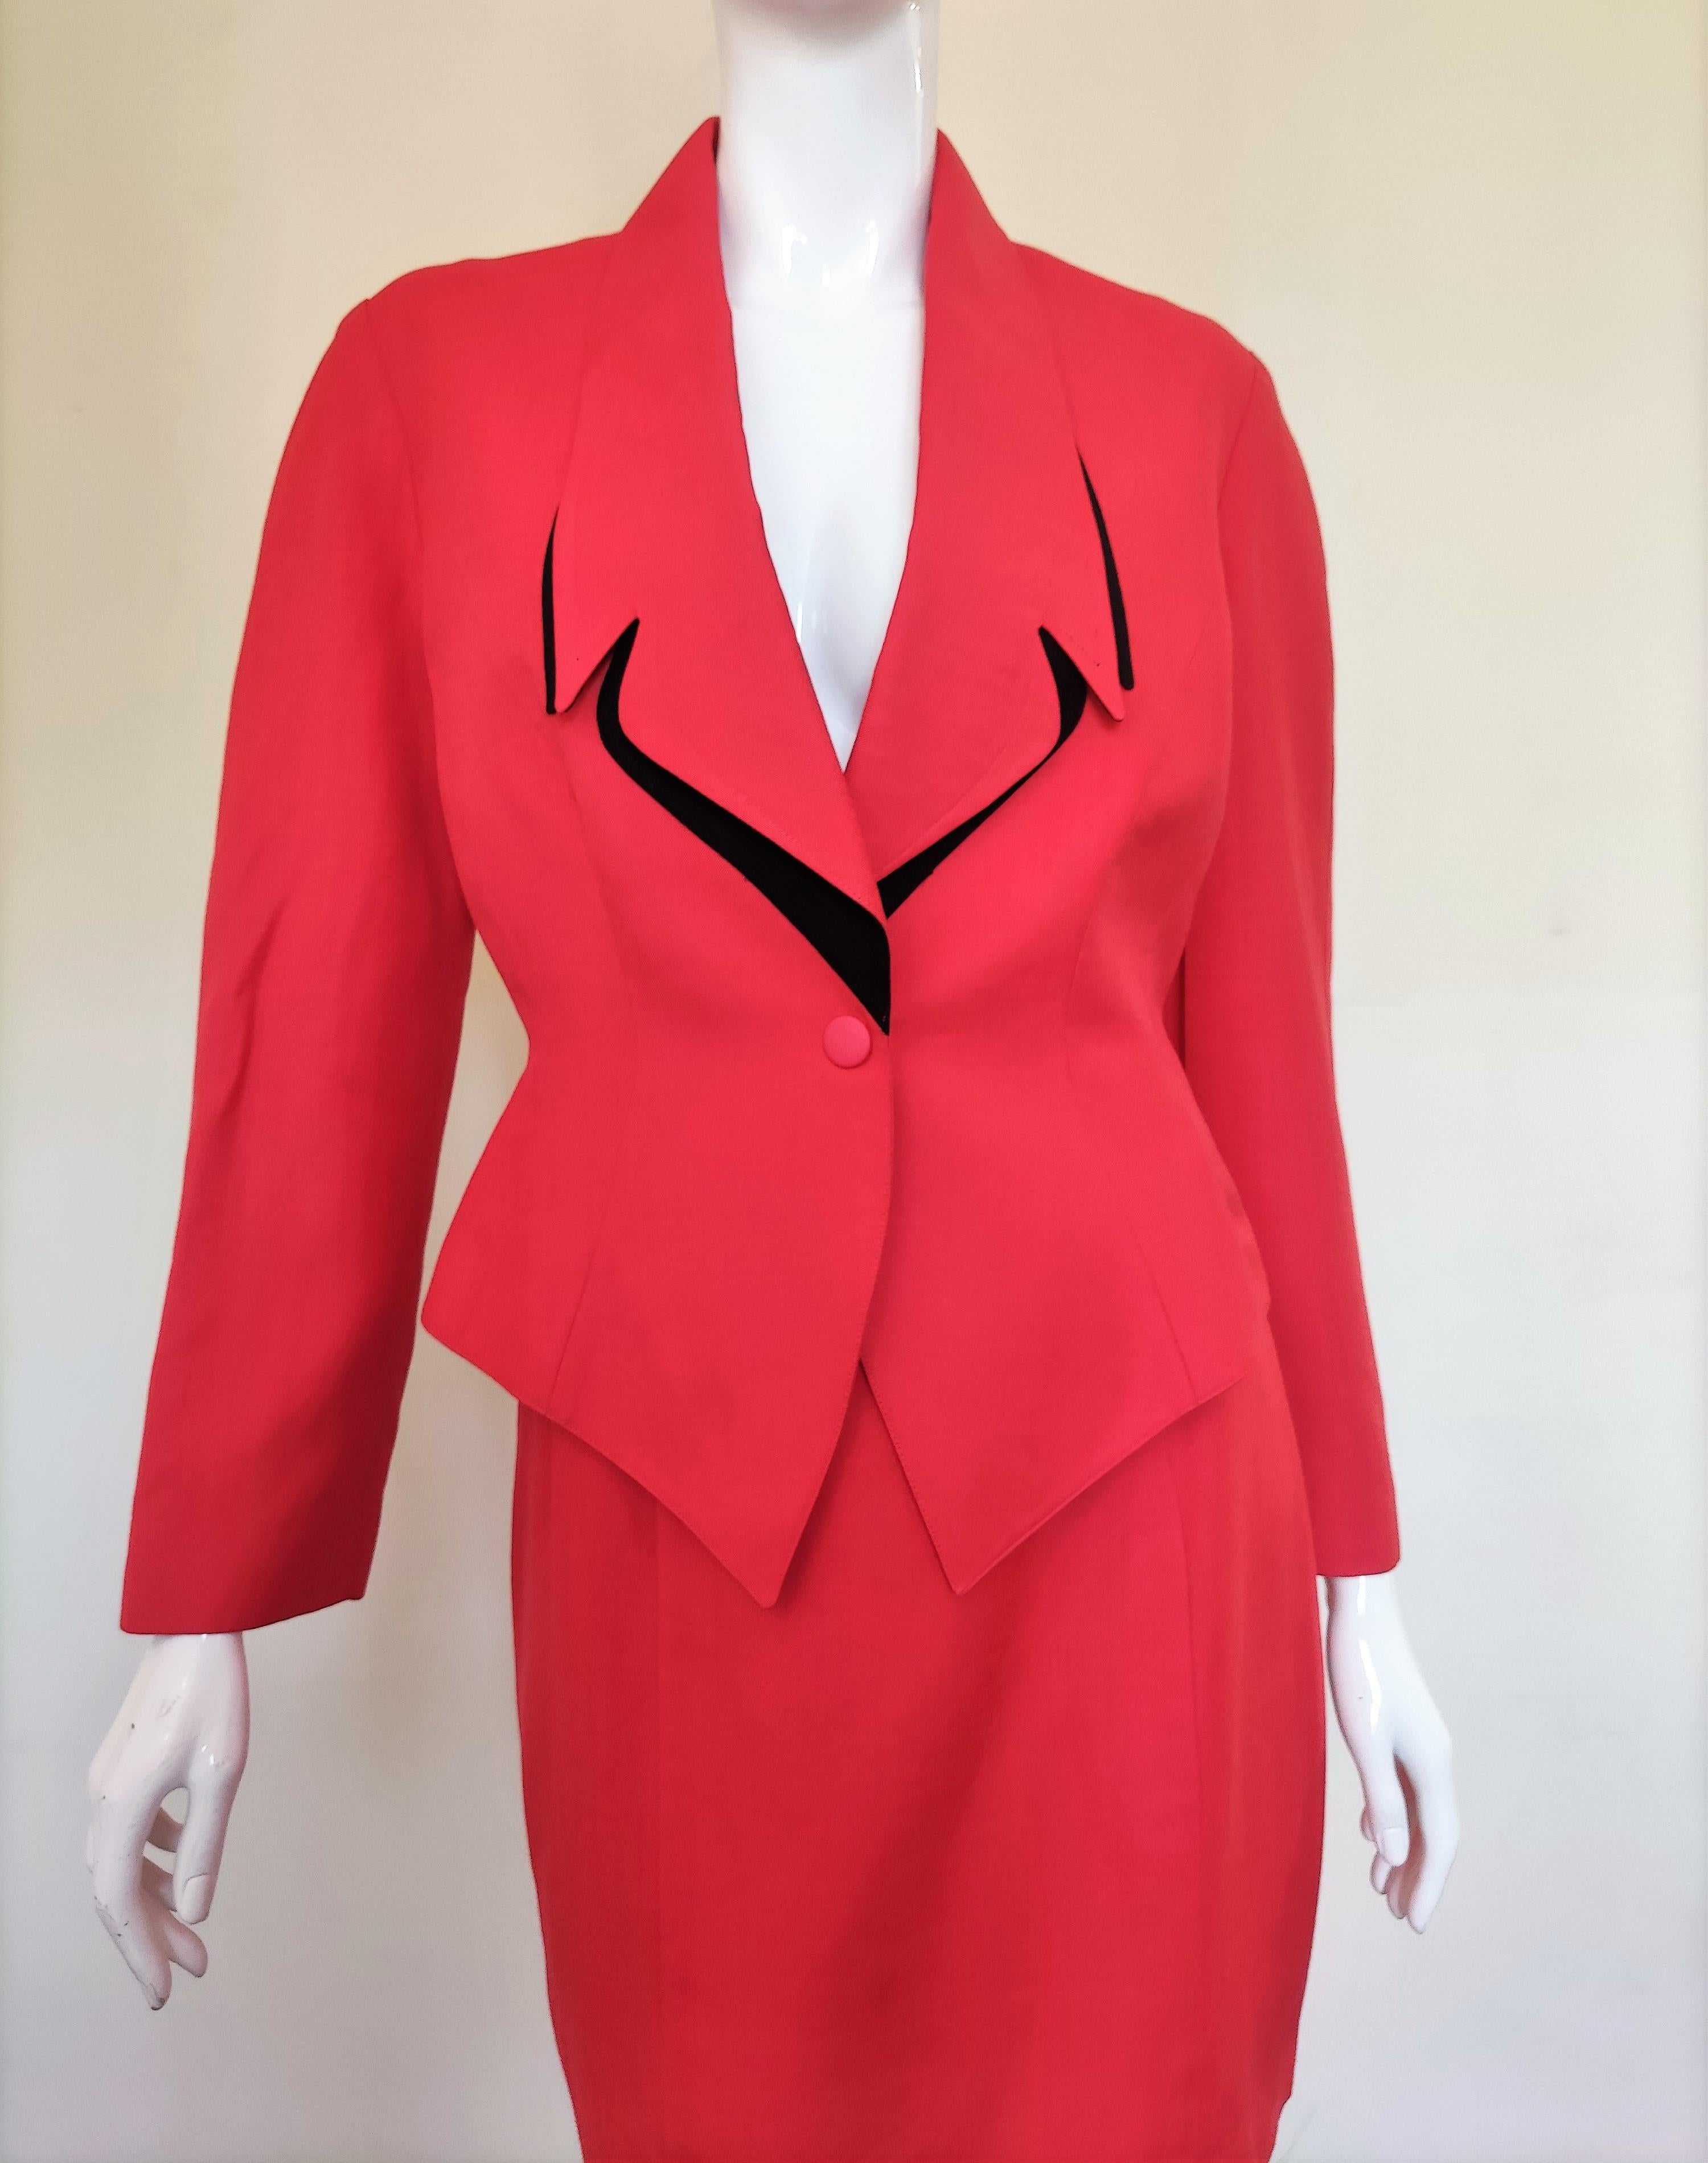 Thierry Mugler Vampire Wasp Waist Red Black Rainbow Couture Dress Ensemble Suit For Sale 9